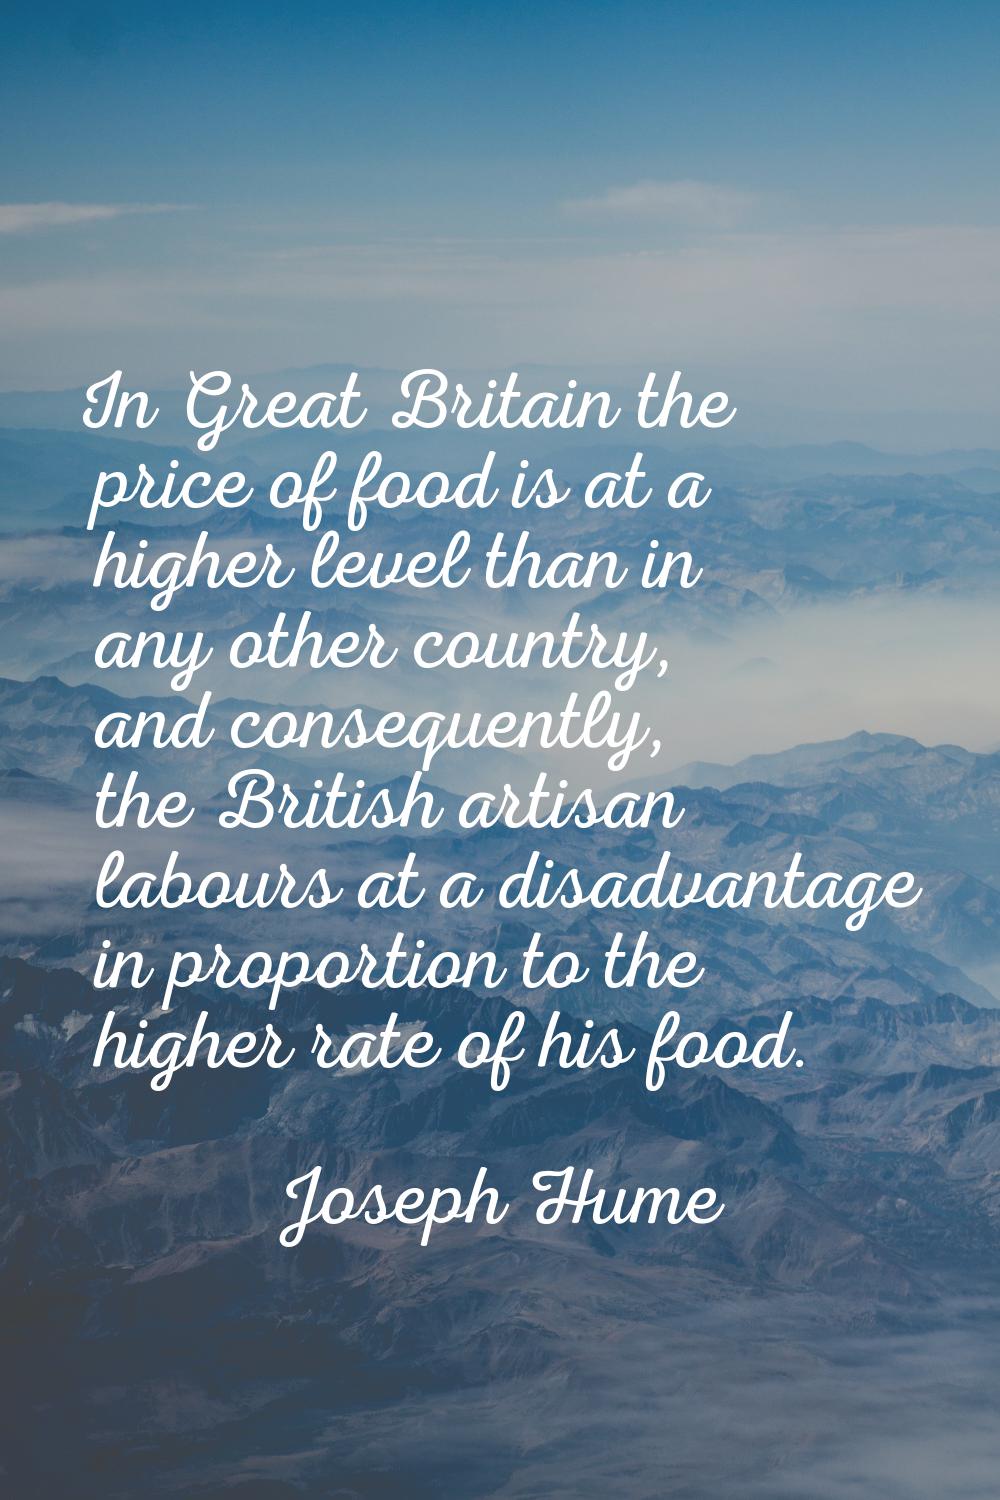 In Great Britain the price of food is at a higher level than in any other country, and consequently